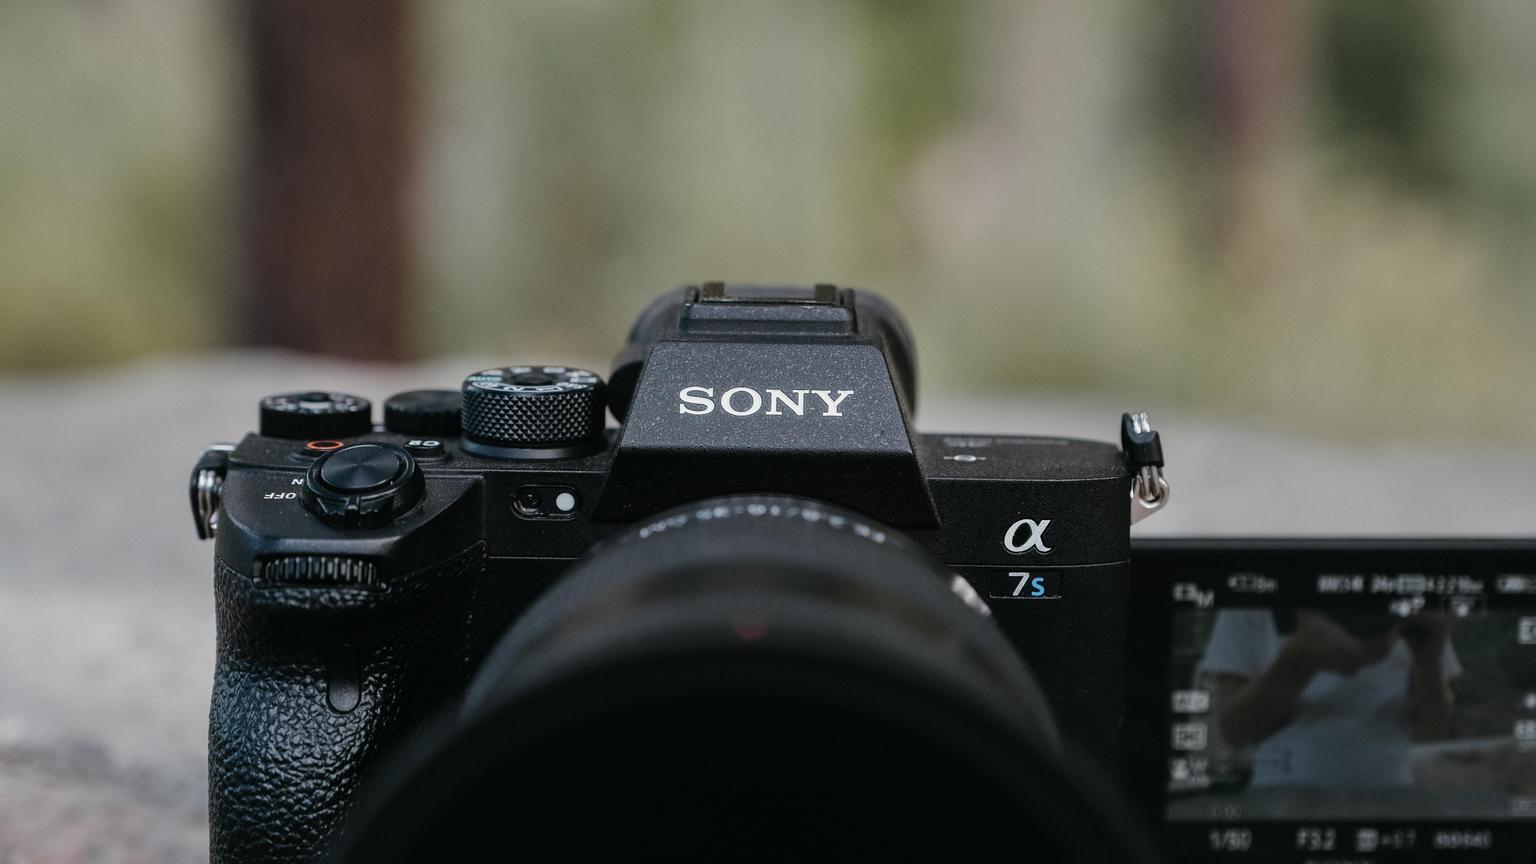 Sony A7S III Review - A full frontal view of the camera.